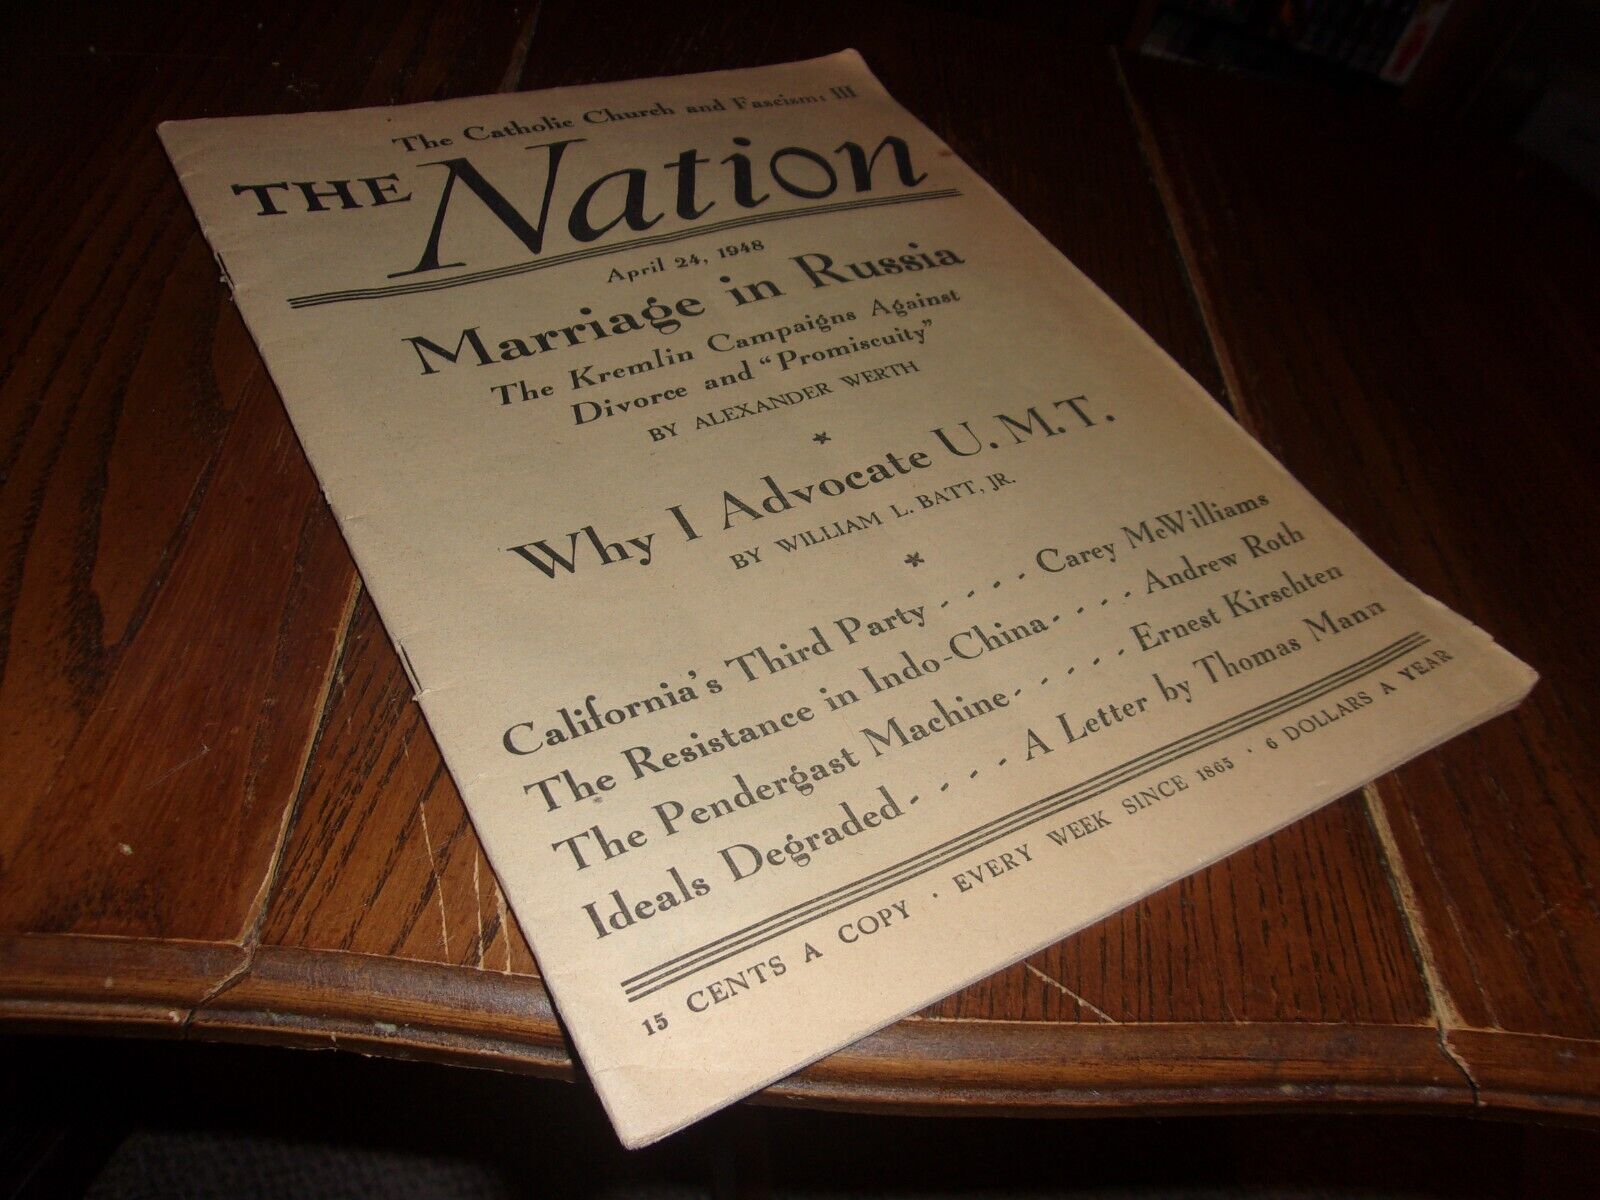 THE NATION - APRIL 24 , 1948 America\'s Leading Liberal Weekly Newspaper